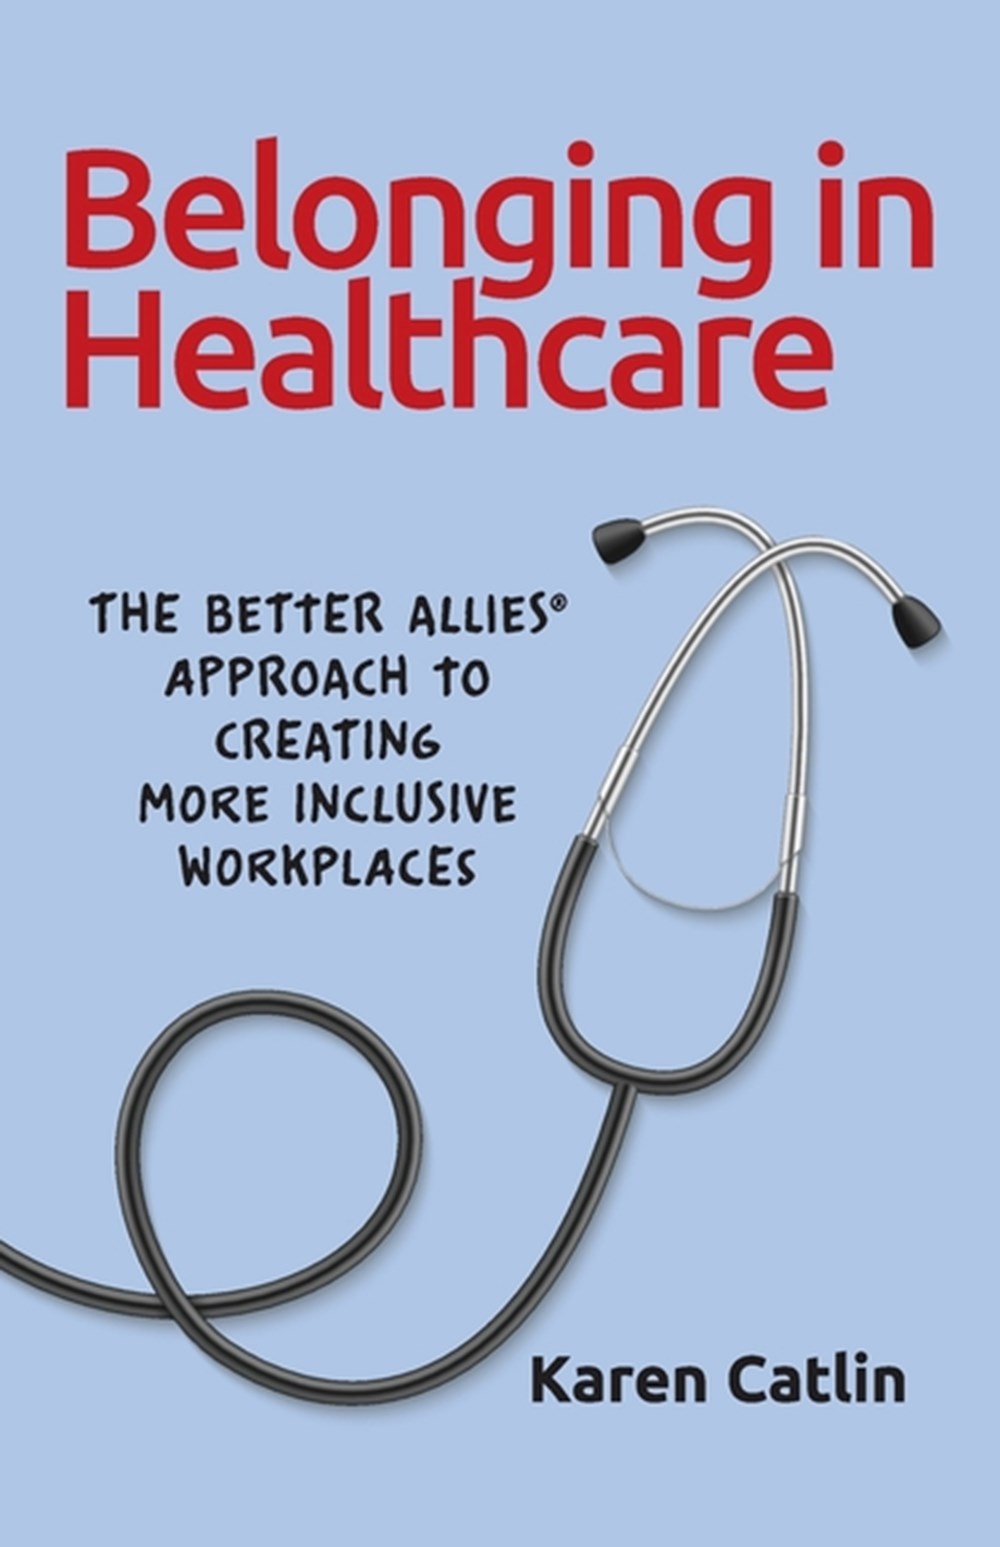 Belonging in Healthcare: The Better Allies® Approach to Creating More Inclusive Workplaces